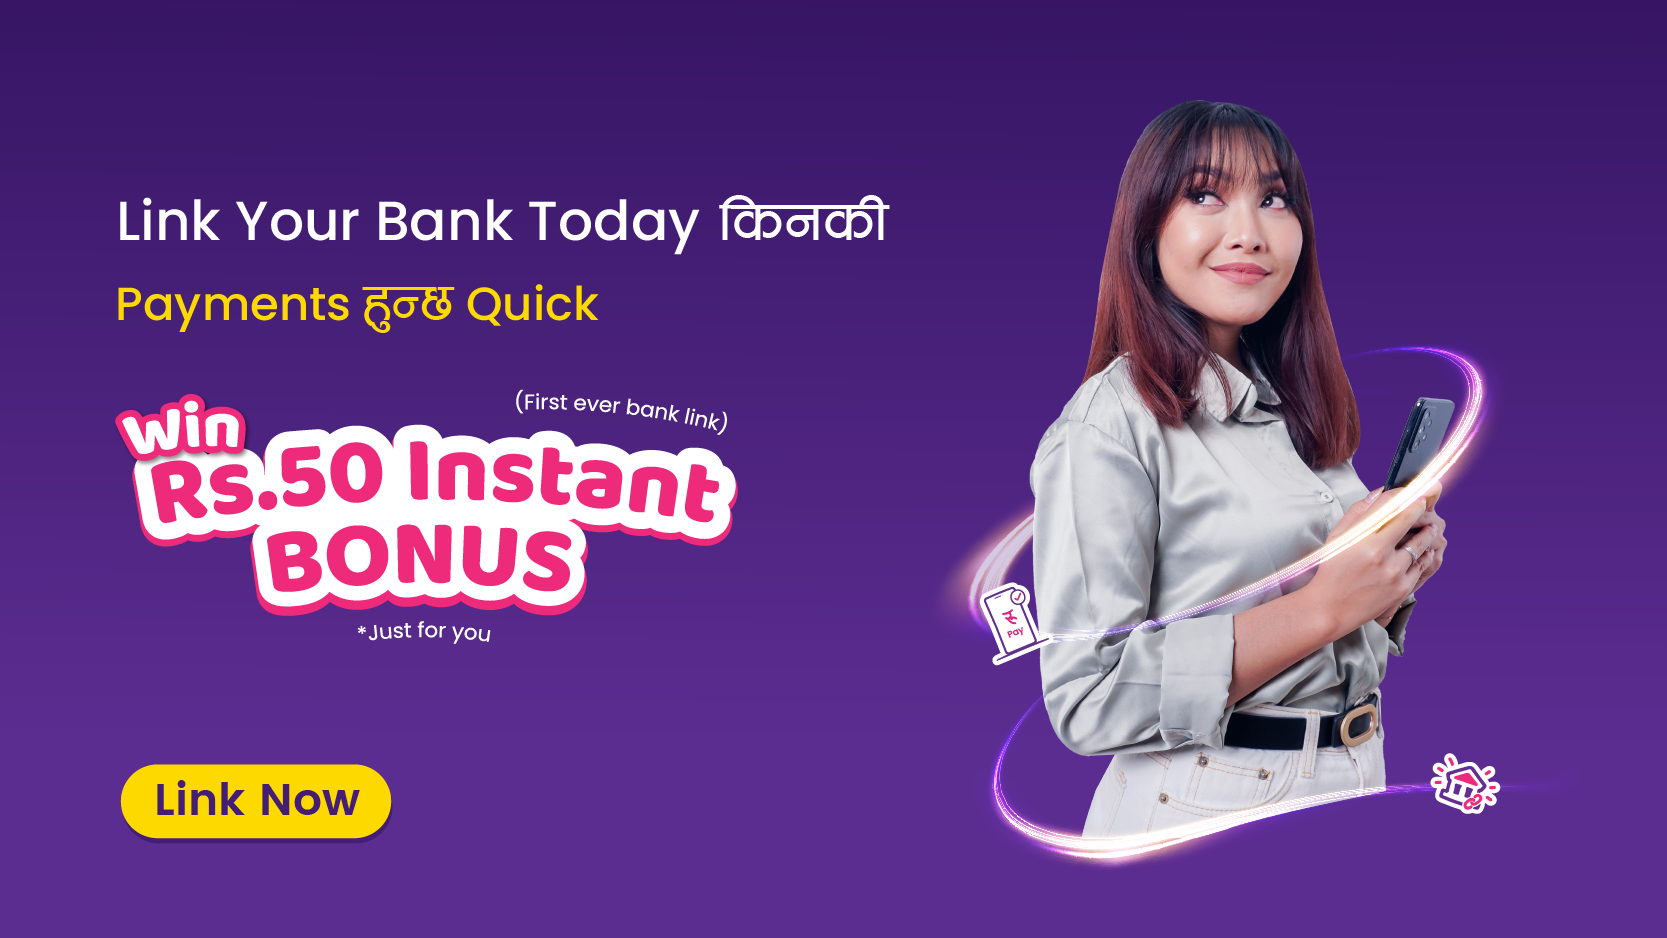 Link your bank account to Khalti and earn Instant bonus